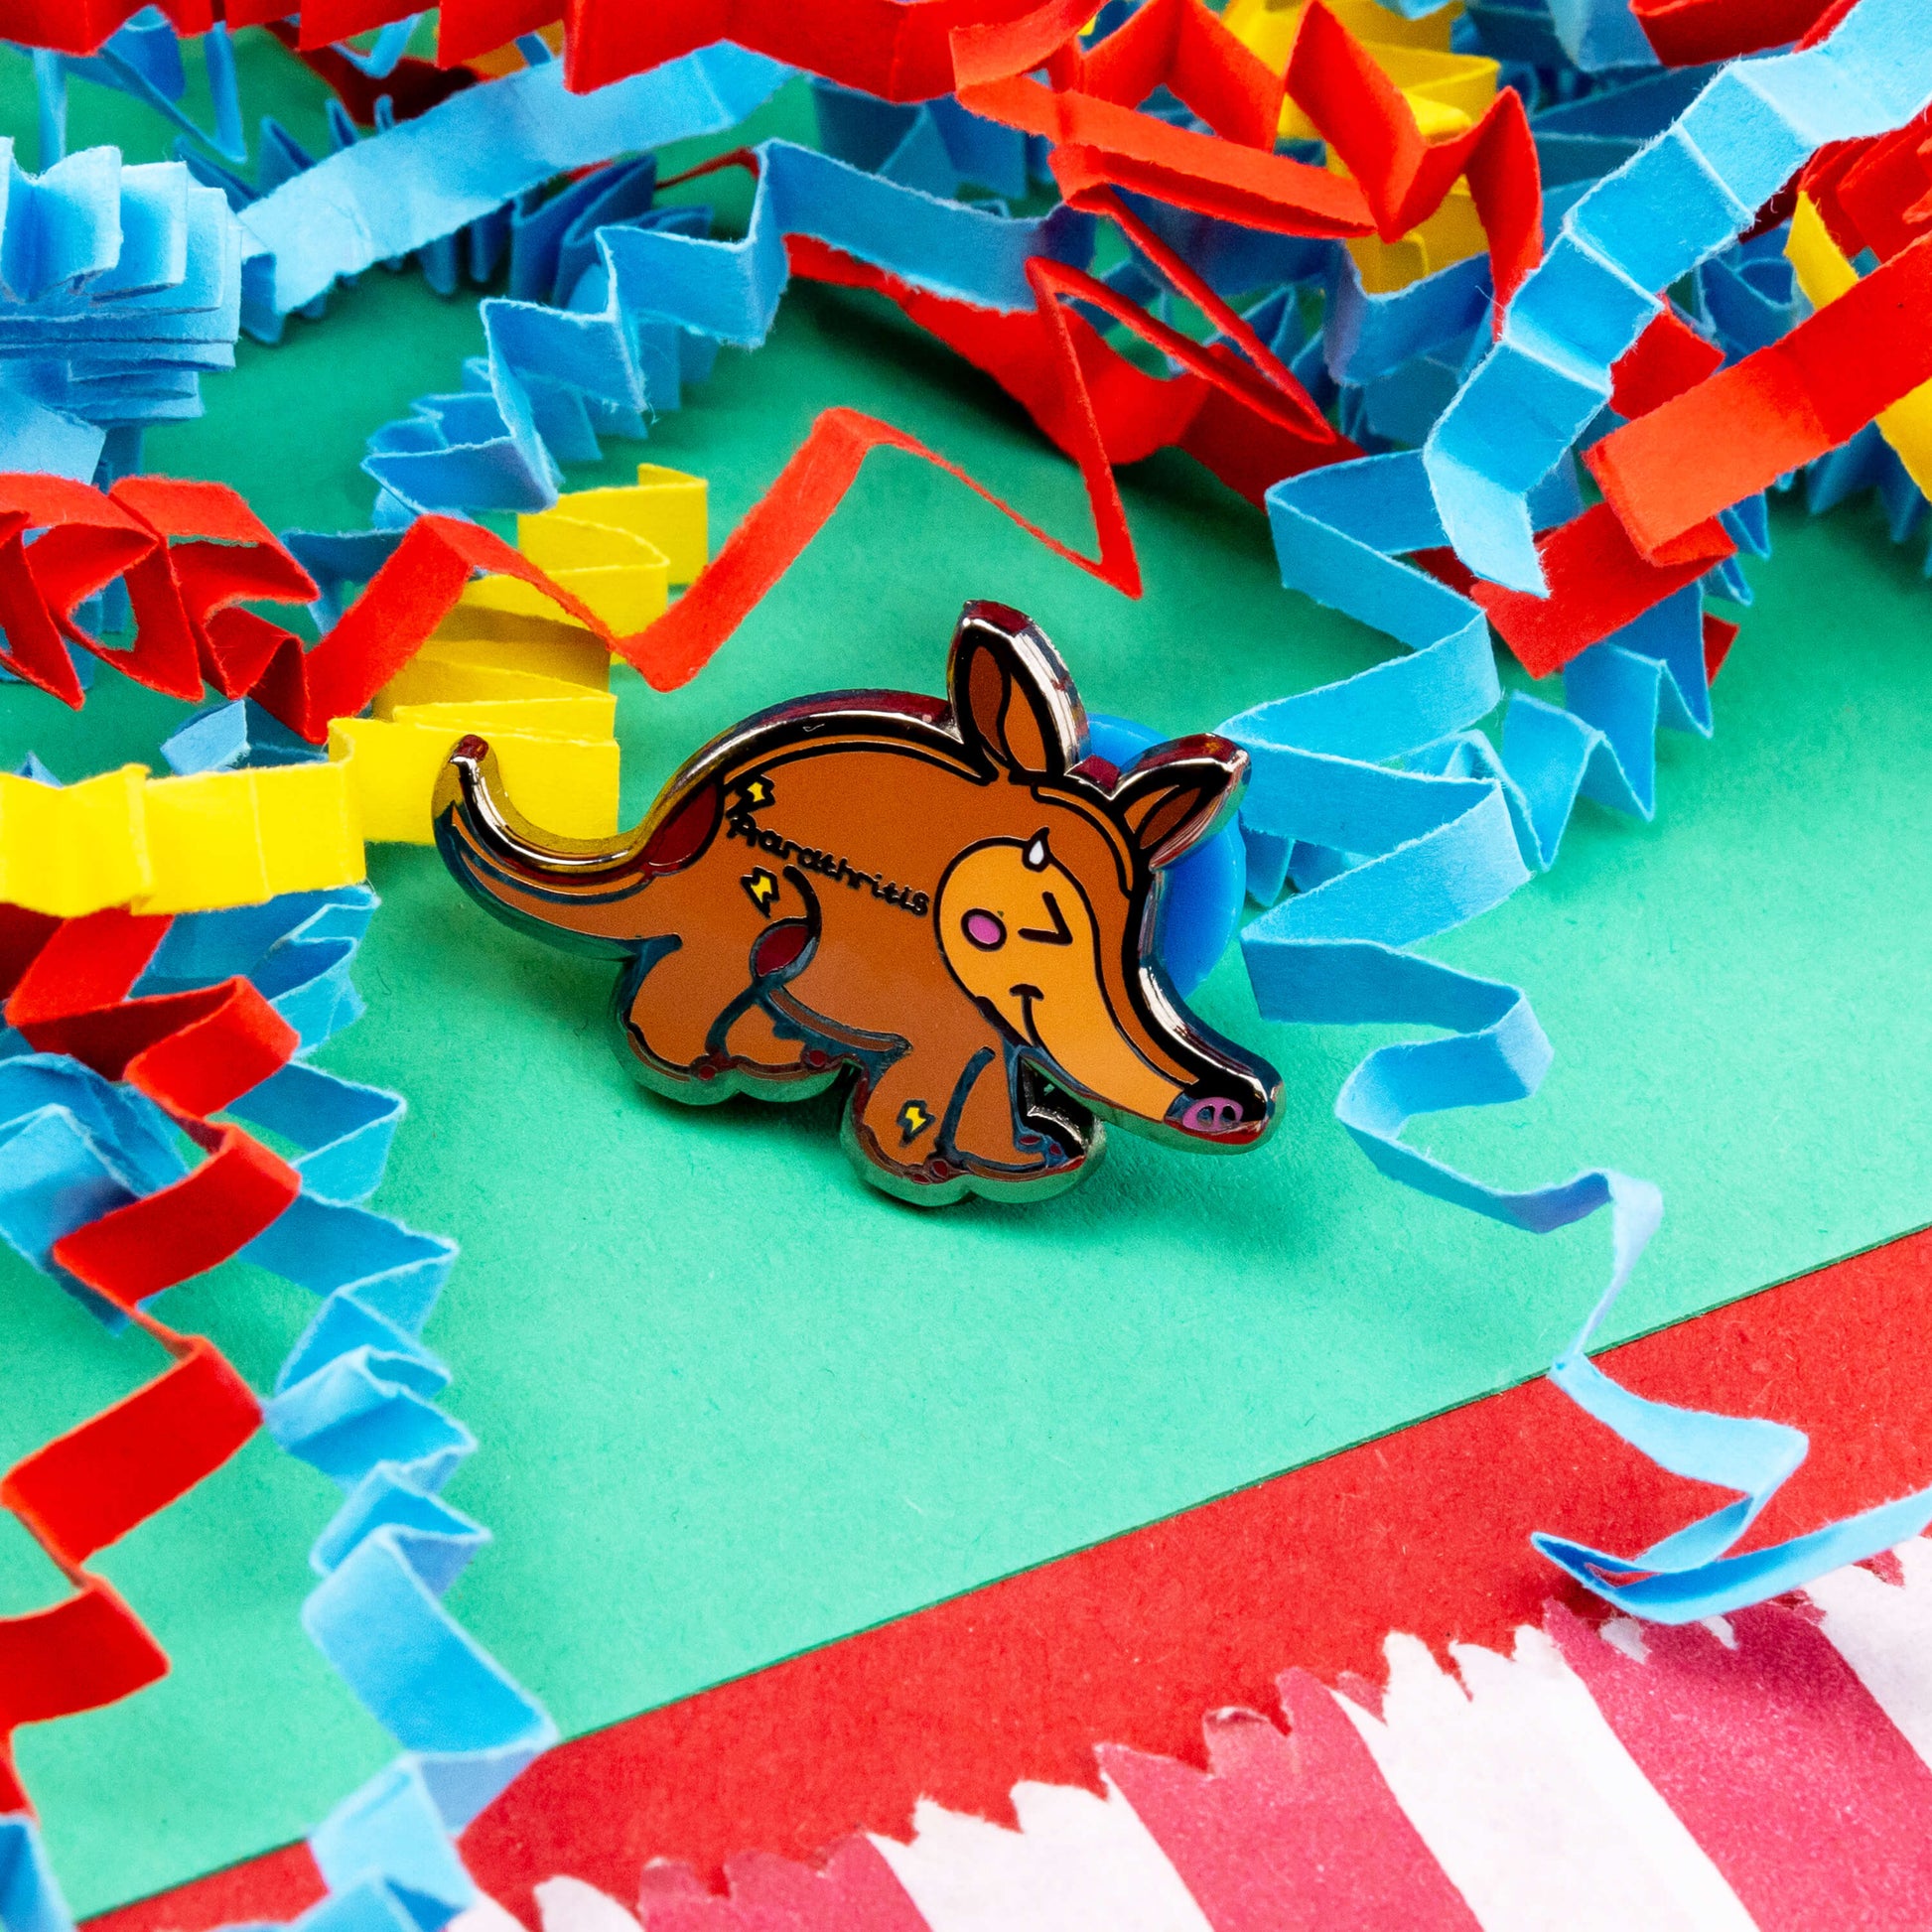 The Aardthritis Aardvark Enamel Pin - Arthritis on a red, blue, green and yellow crinkle card confetti background. The smiling sweating brown aardvark with pink cheeks and lightning bolts scattered across its body with black text reading 'aardthritis'. The hand drawn design is raising awareness for arthritis, Osteoarthritis and Rheumatoid arthritis.